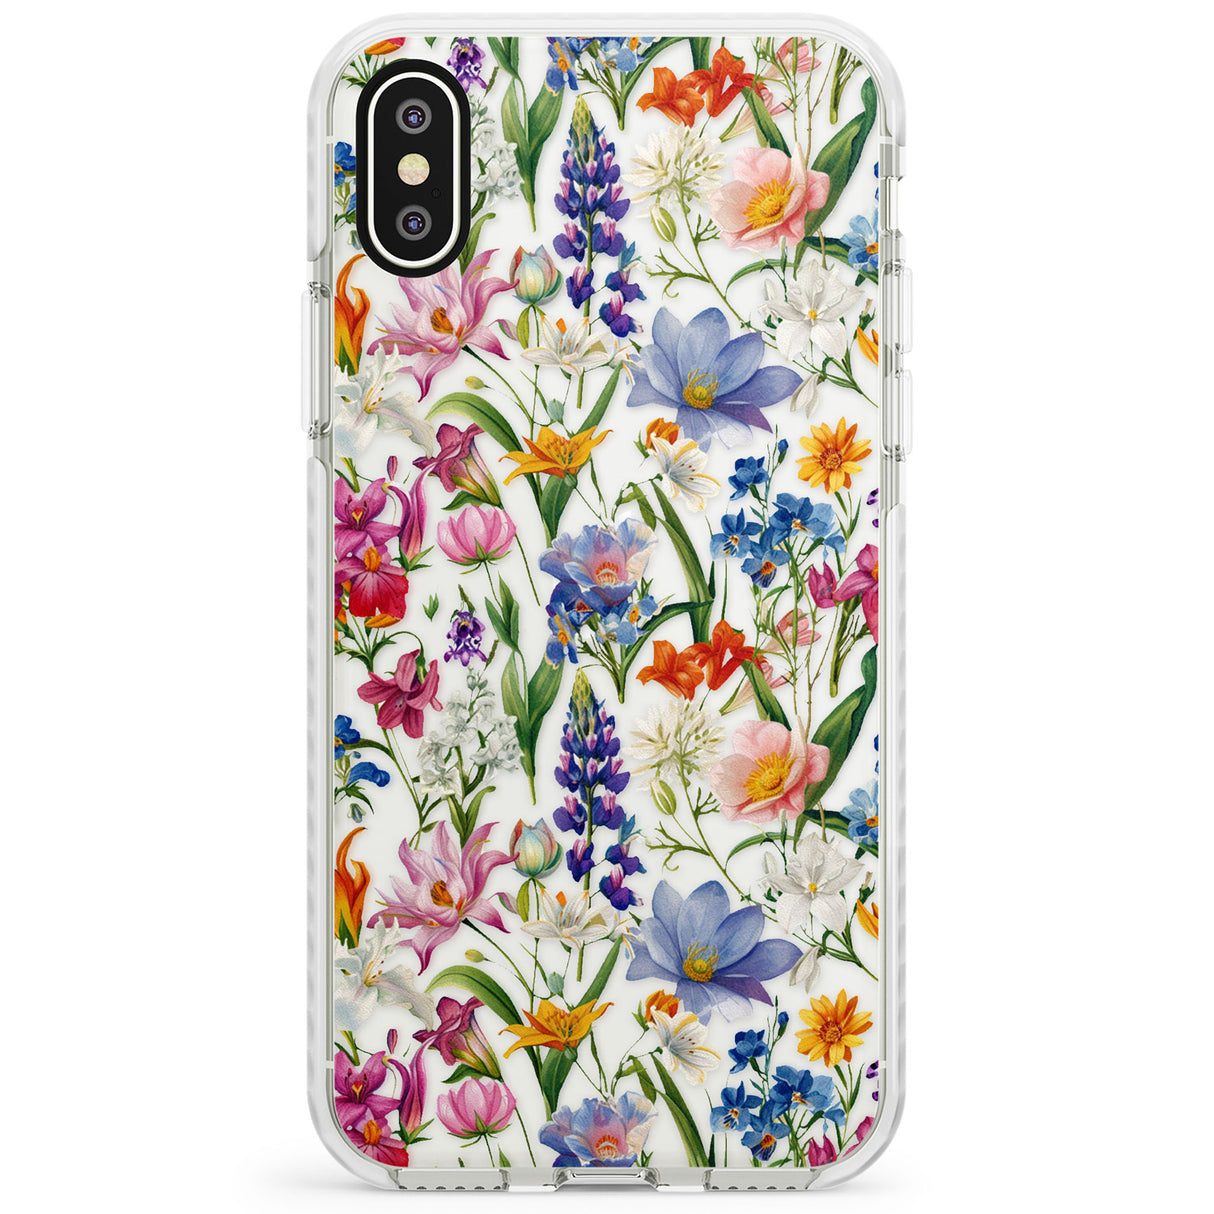 Vintage Wildflowers Impact Phone Case for iPhone X XS Max XR